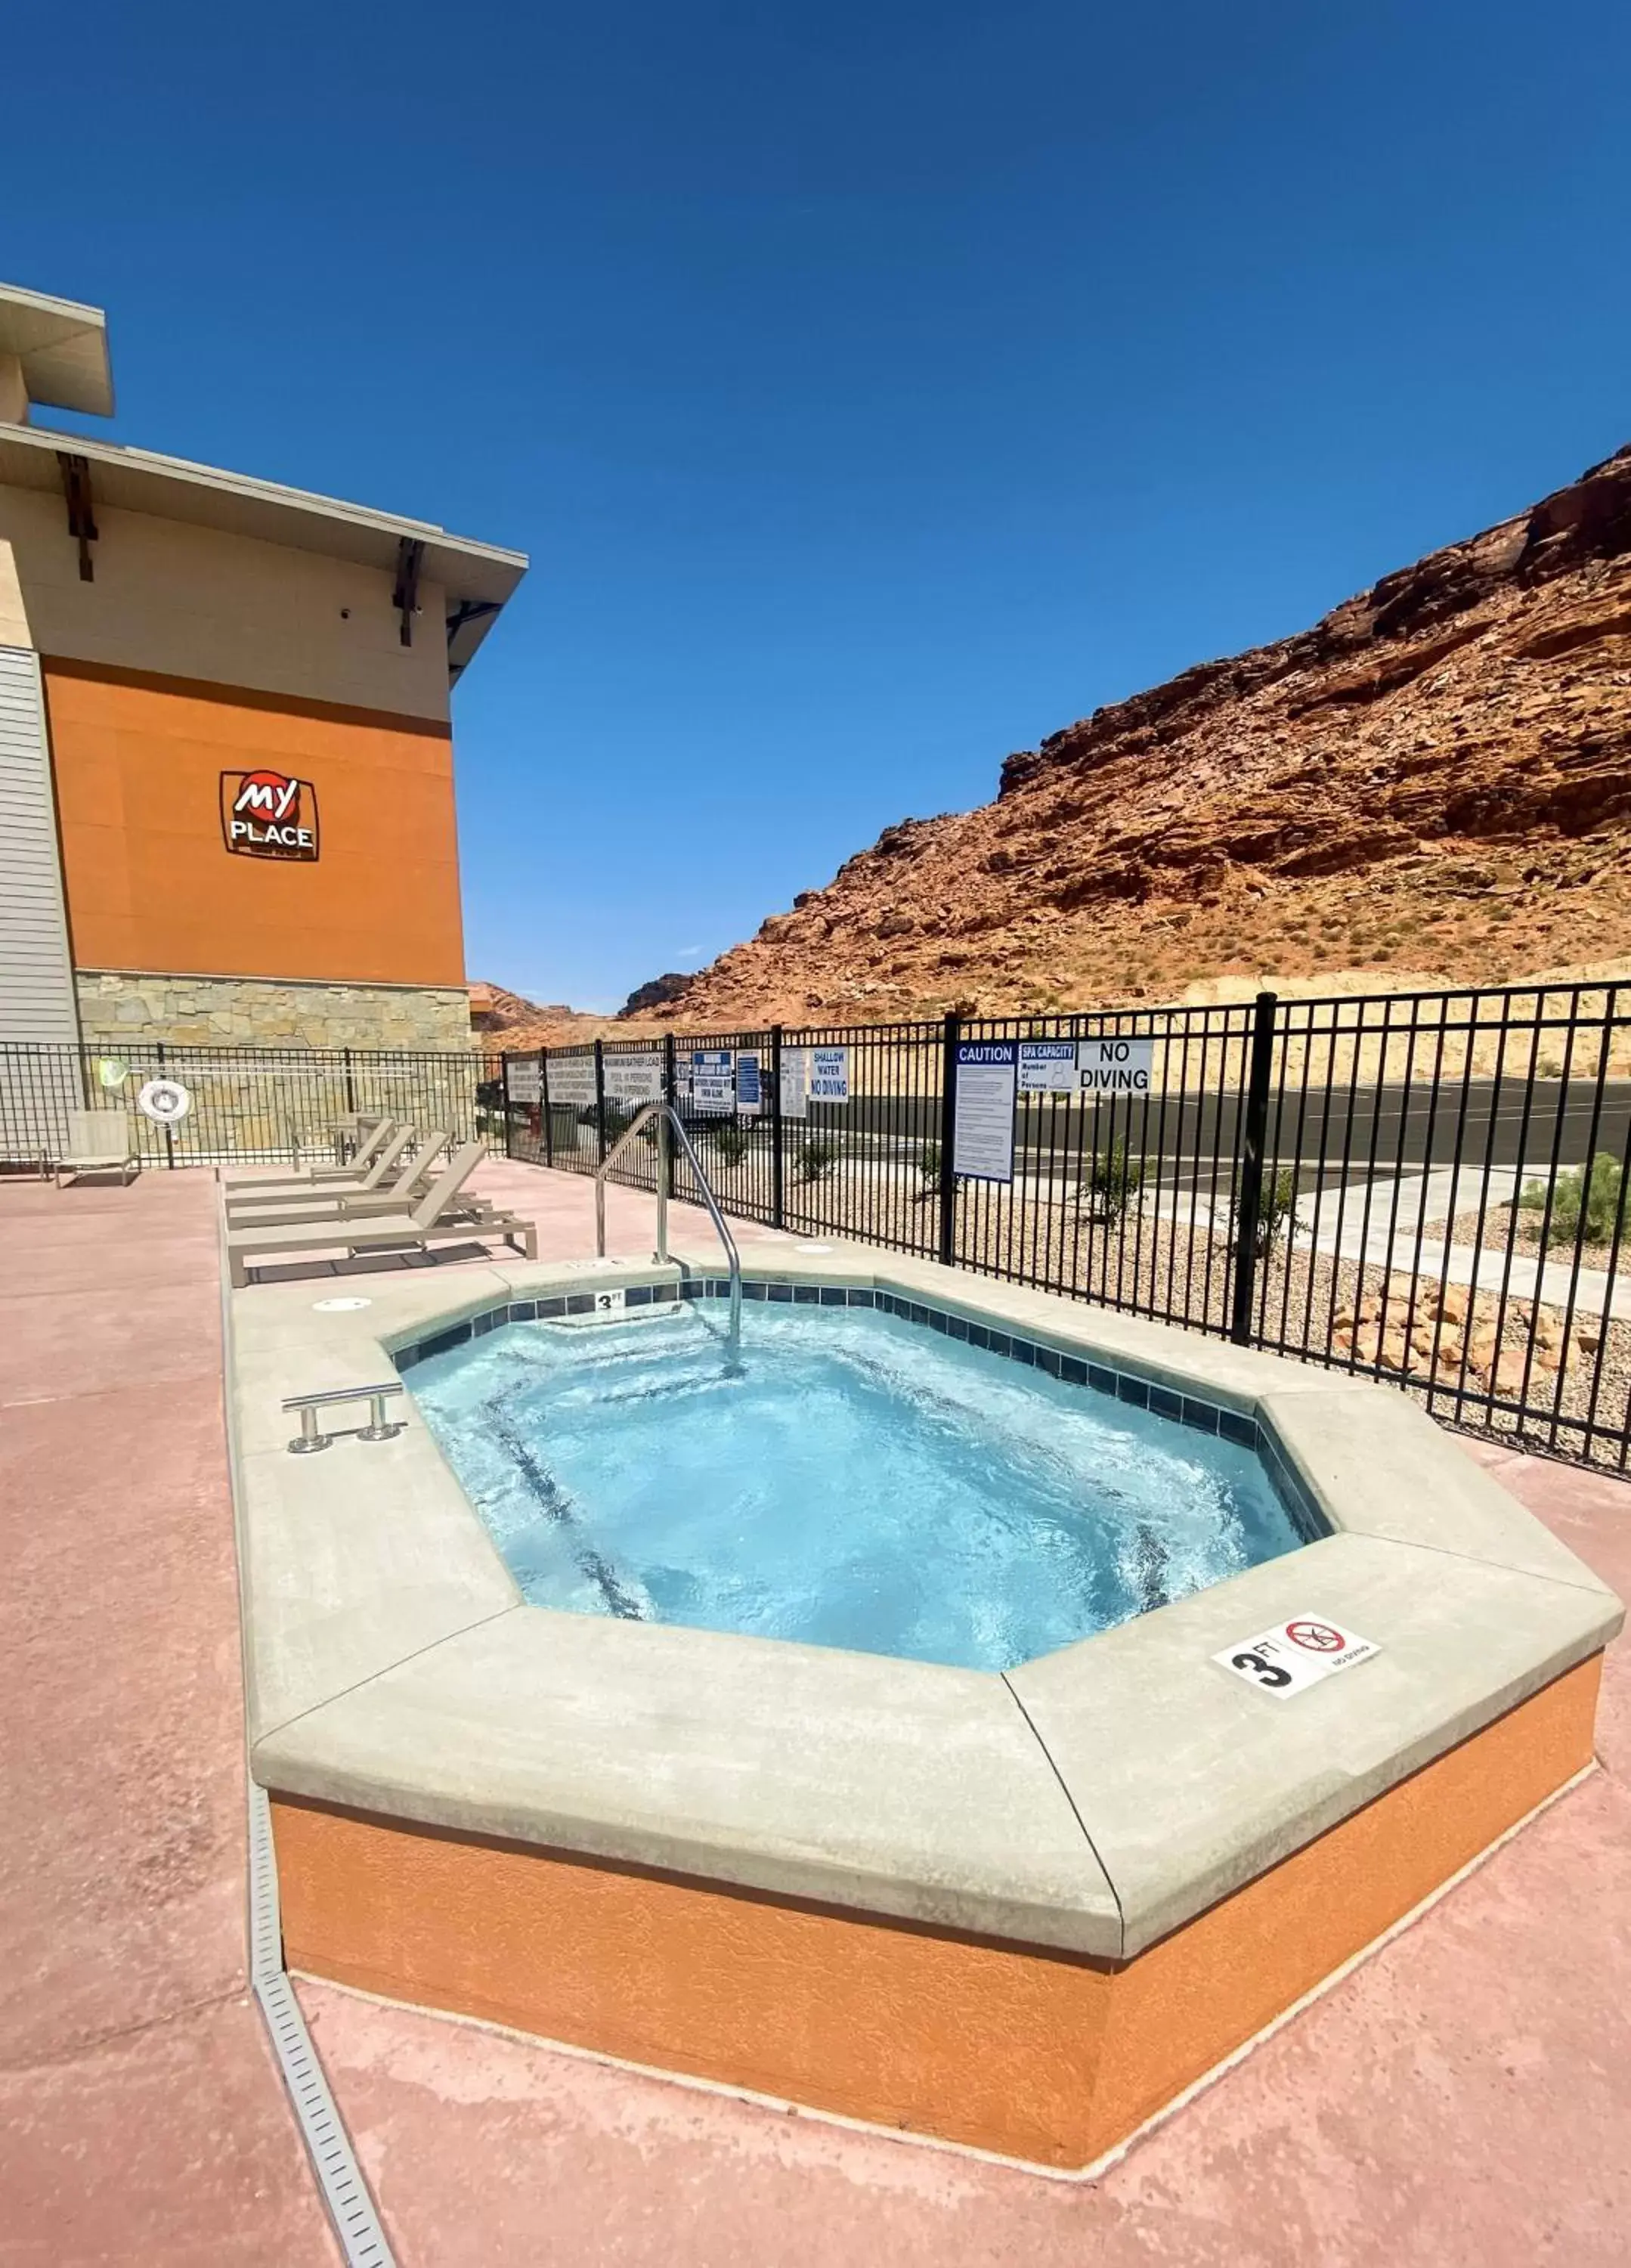 Hot Tub, Swimming Pool in My Place Hotel-Moab, UT